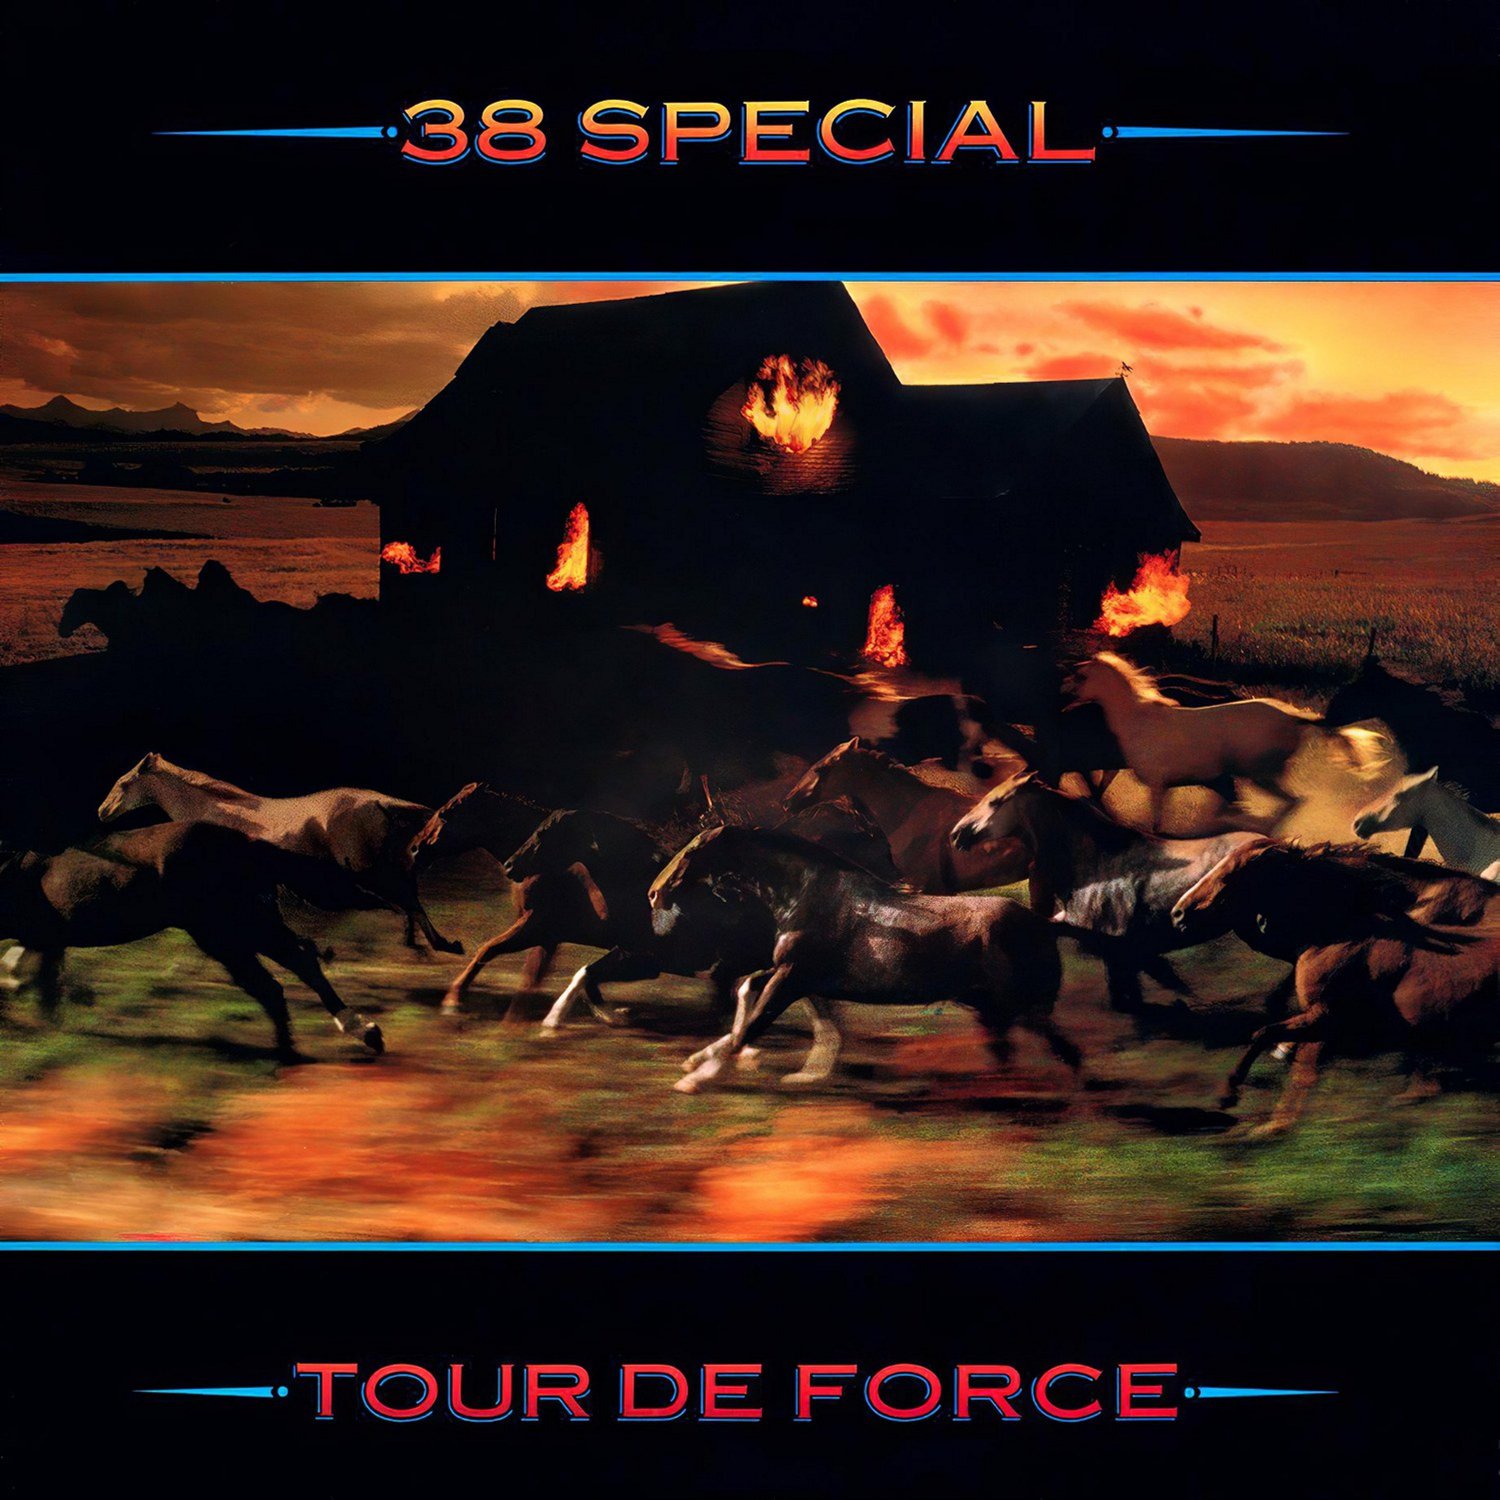 38 SPECIAL Tour De Force BANNER Huge 4X4 Ft Fabric Poster Tapestry Flag Print album cover art